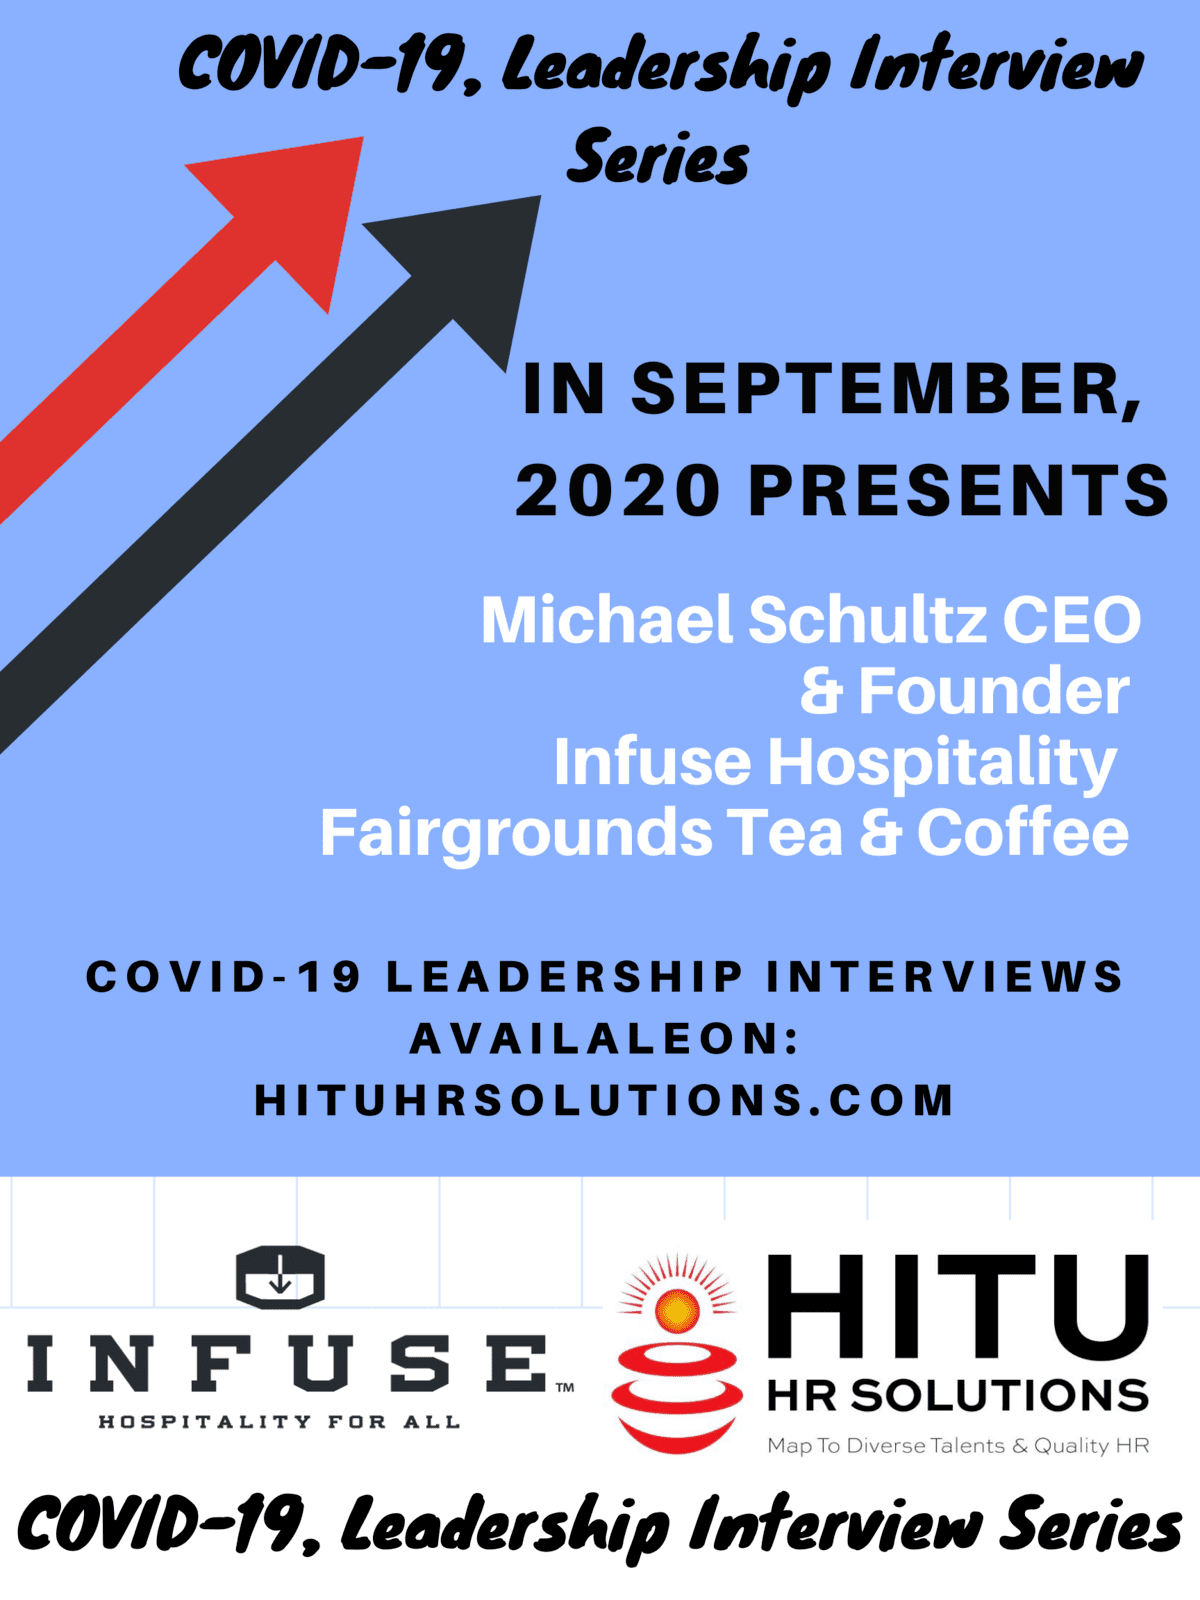 Leadership Interview: Michael Schultz the CEO of Infuse Hospitality